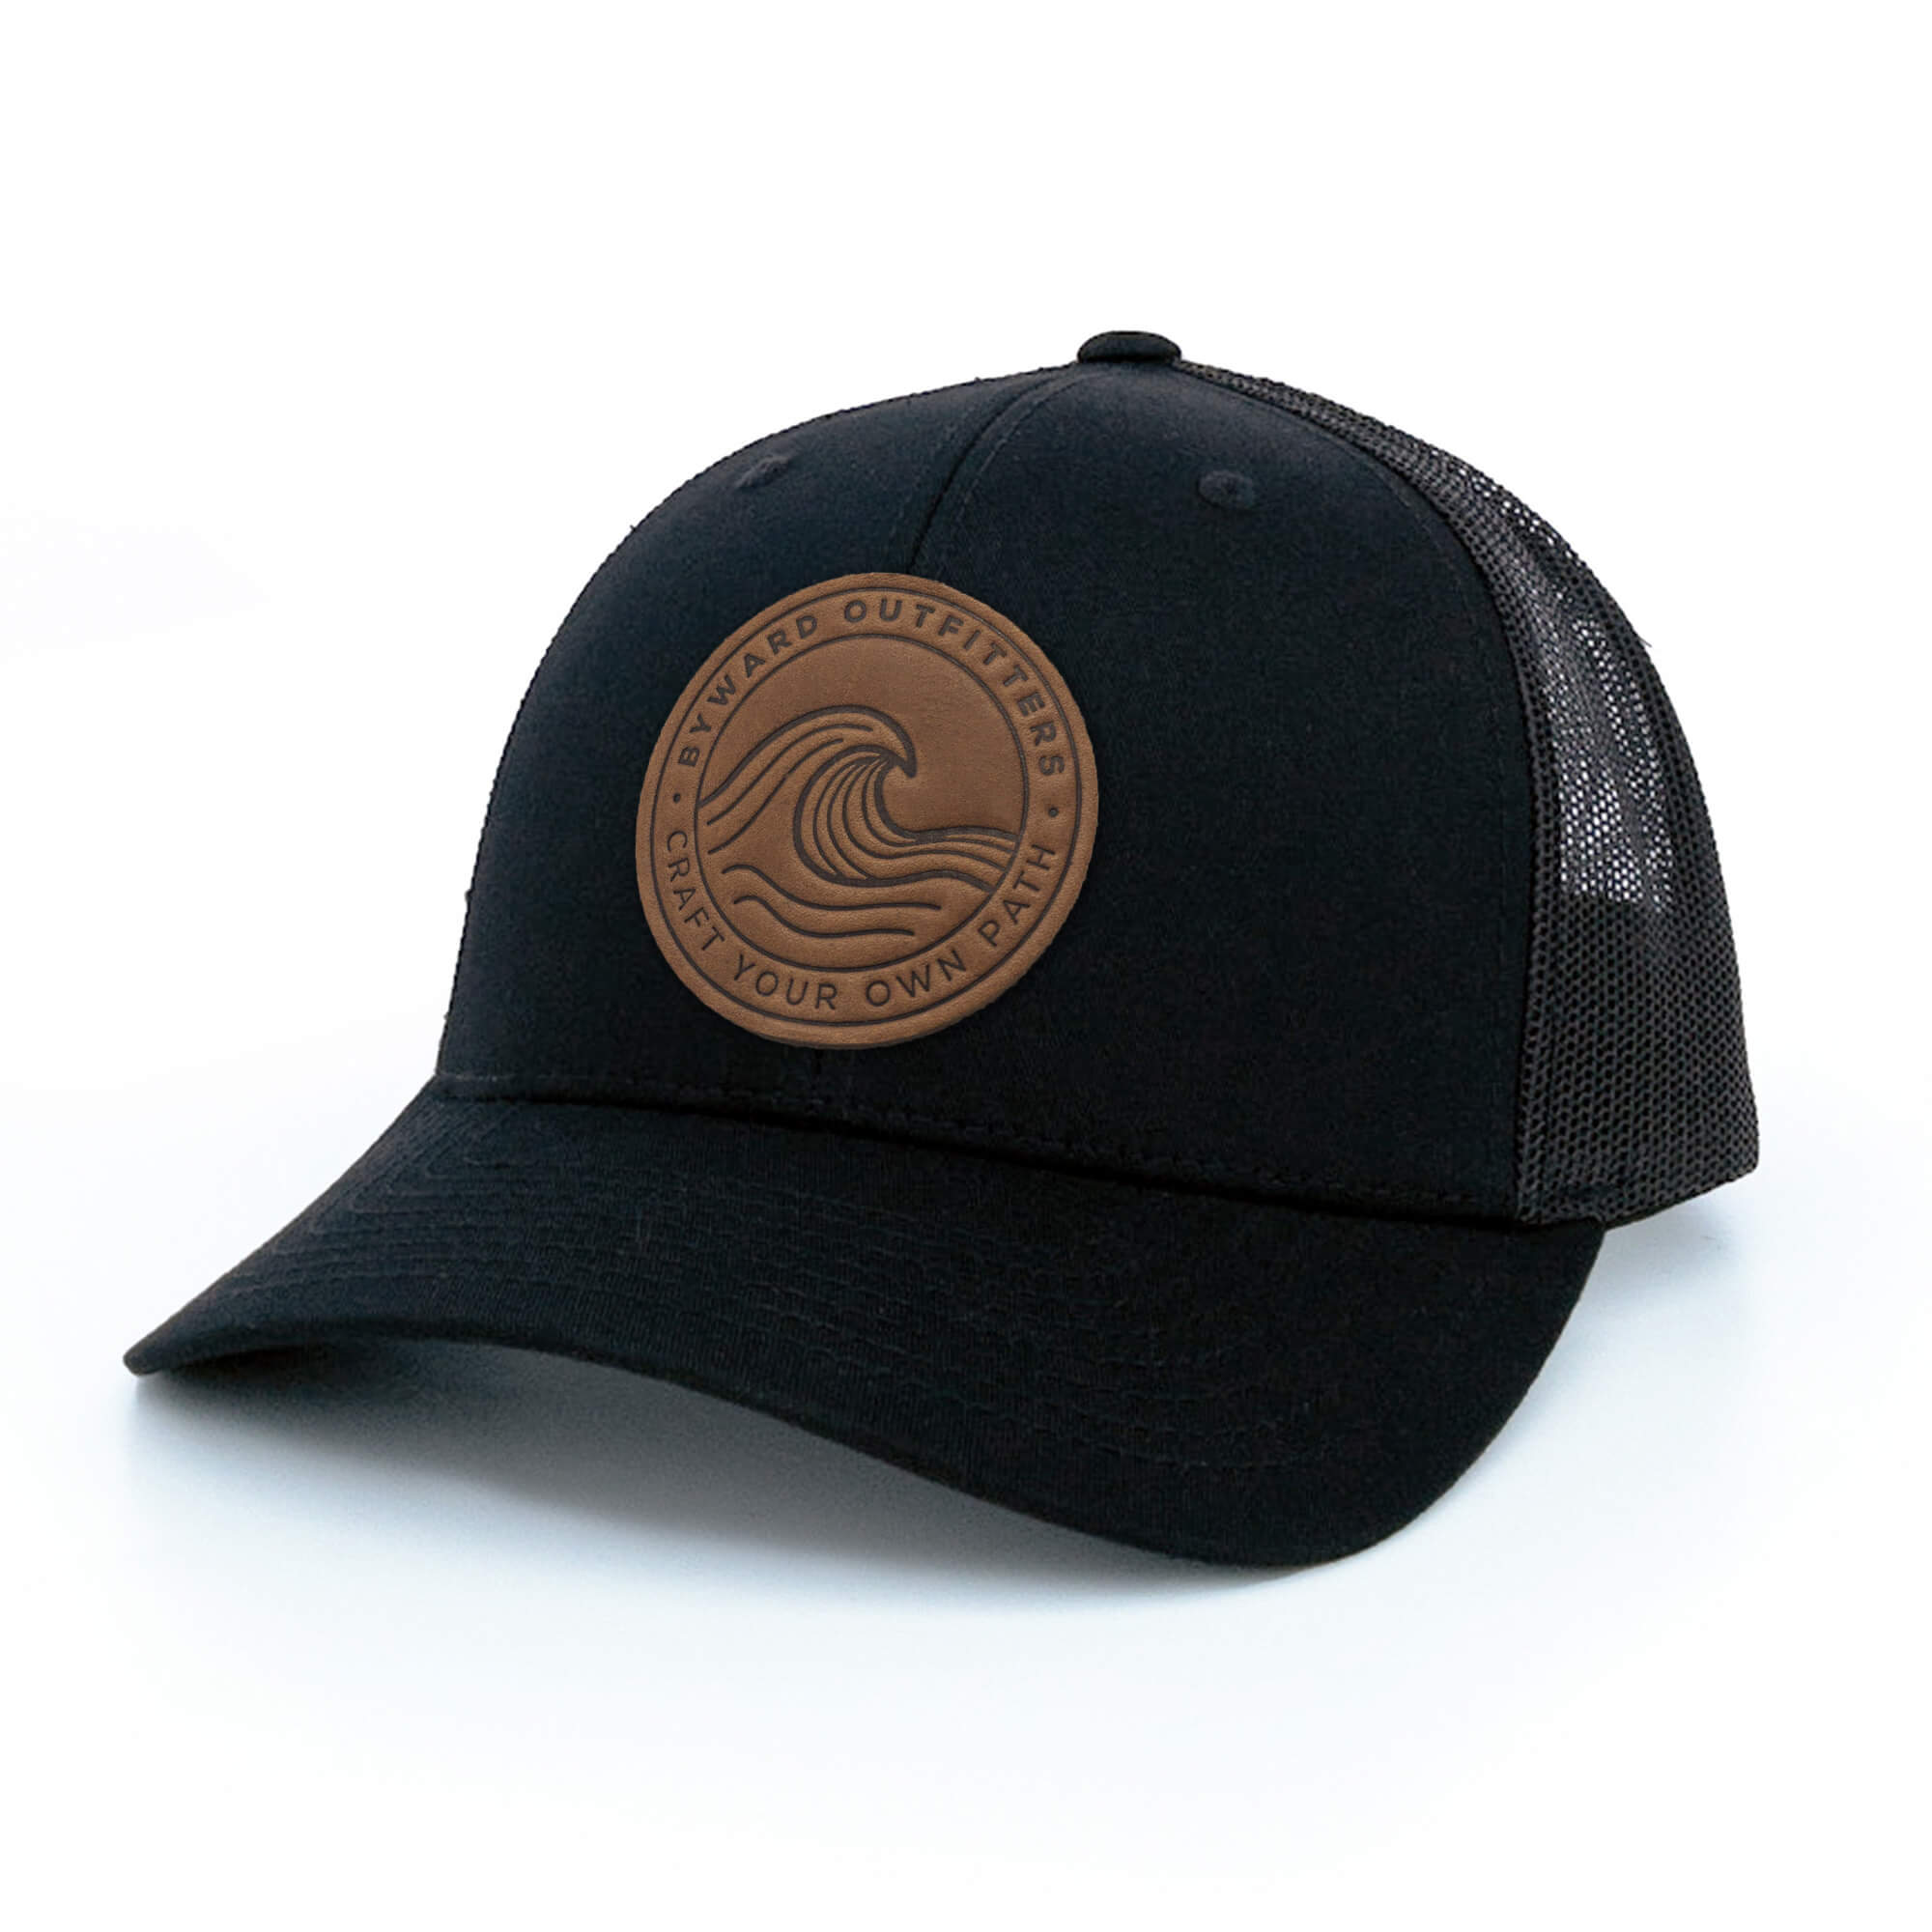 Black trucker hat with full-grain leather patch of a Rolling Wave | BLACK-005-003, CHARC-005-003, NAVY-005-003, HGREY-005-003, MOSS-005-003, BROWN-005-003